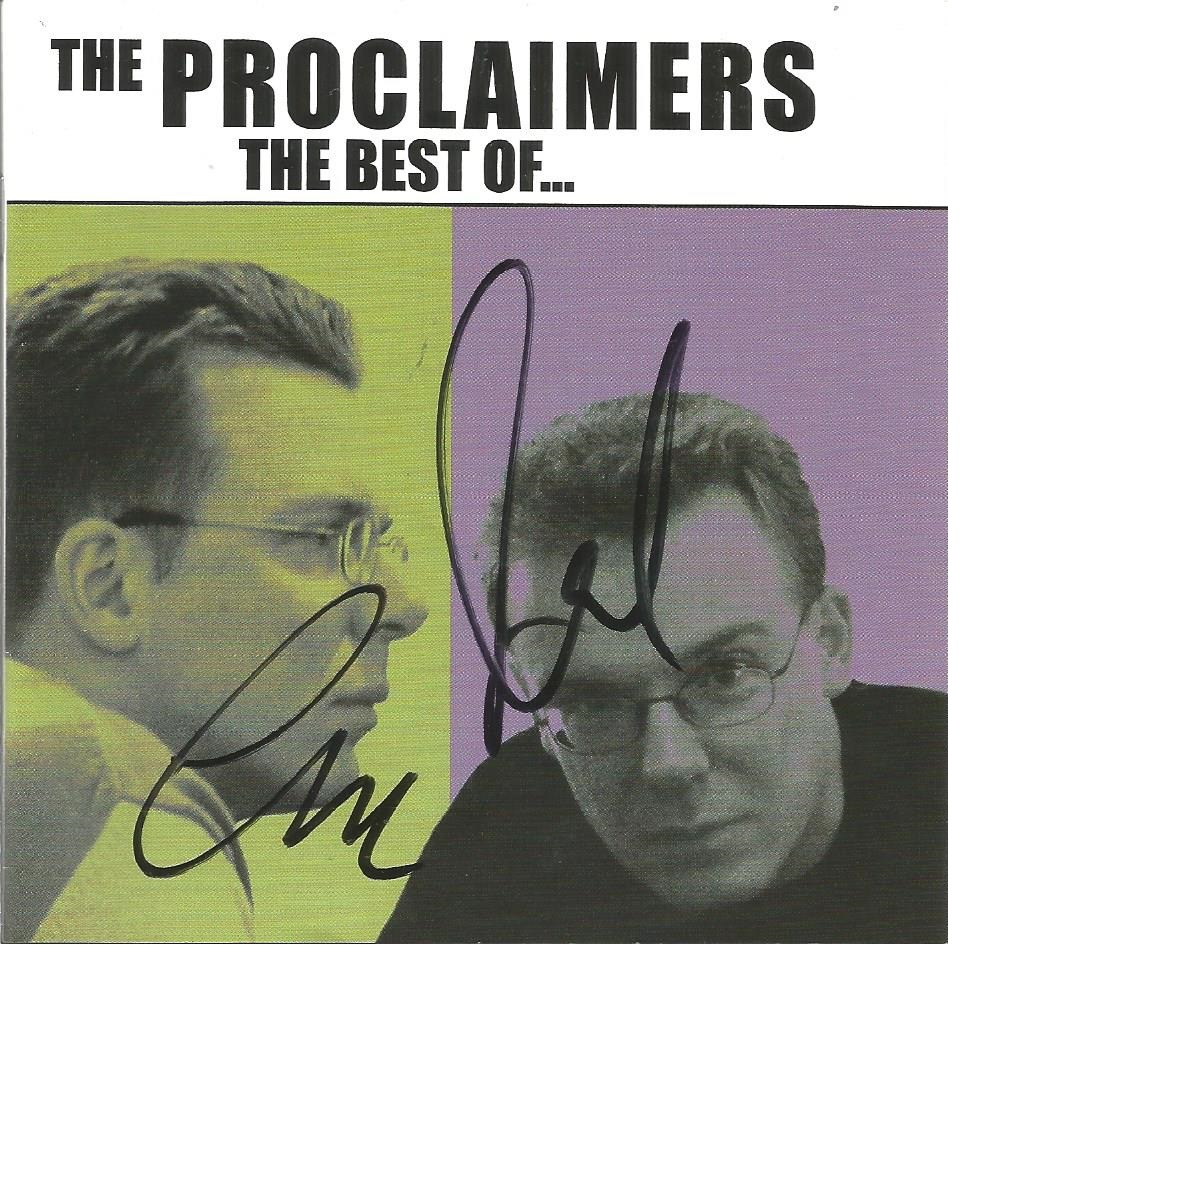 Charlie and Craig Reid 'The Proclaimers' signed CD Insert with the CD included. The Proclaimers, The